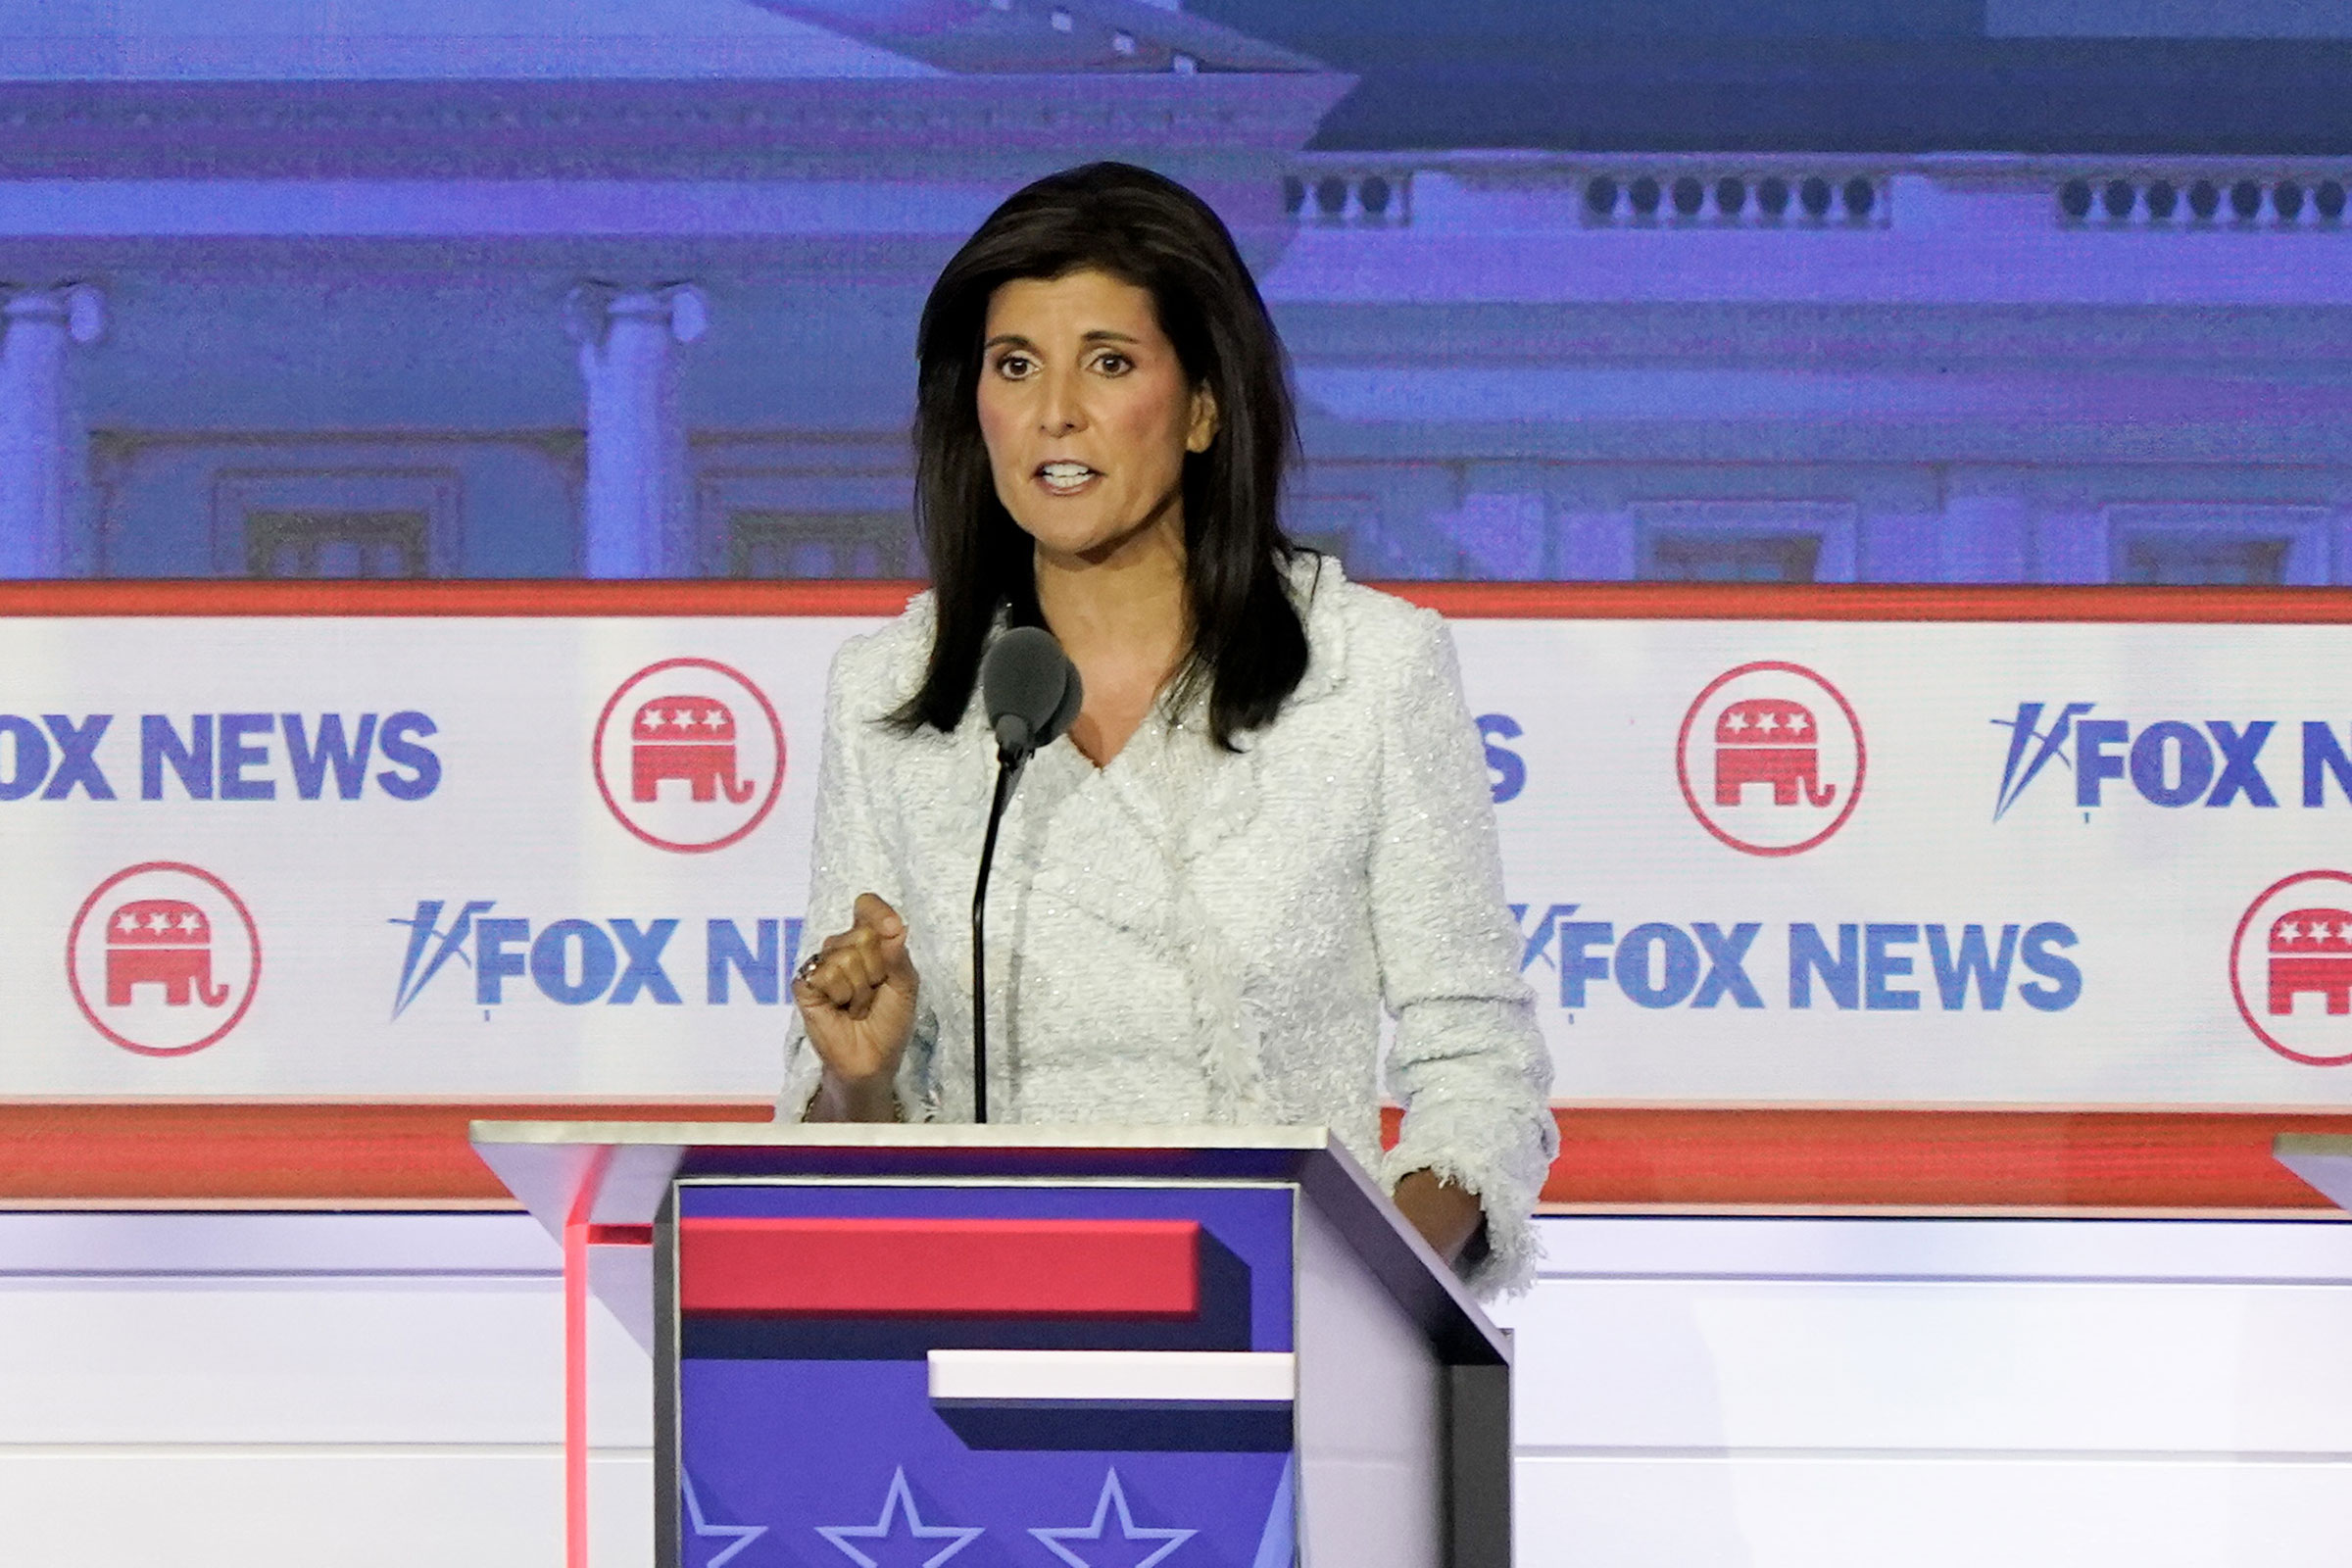 Nikki Haley, former ambassador to the U.N., behind a podium on stage during the primary presidential debate